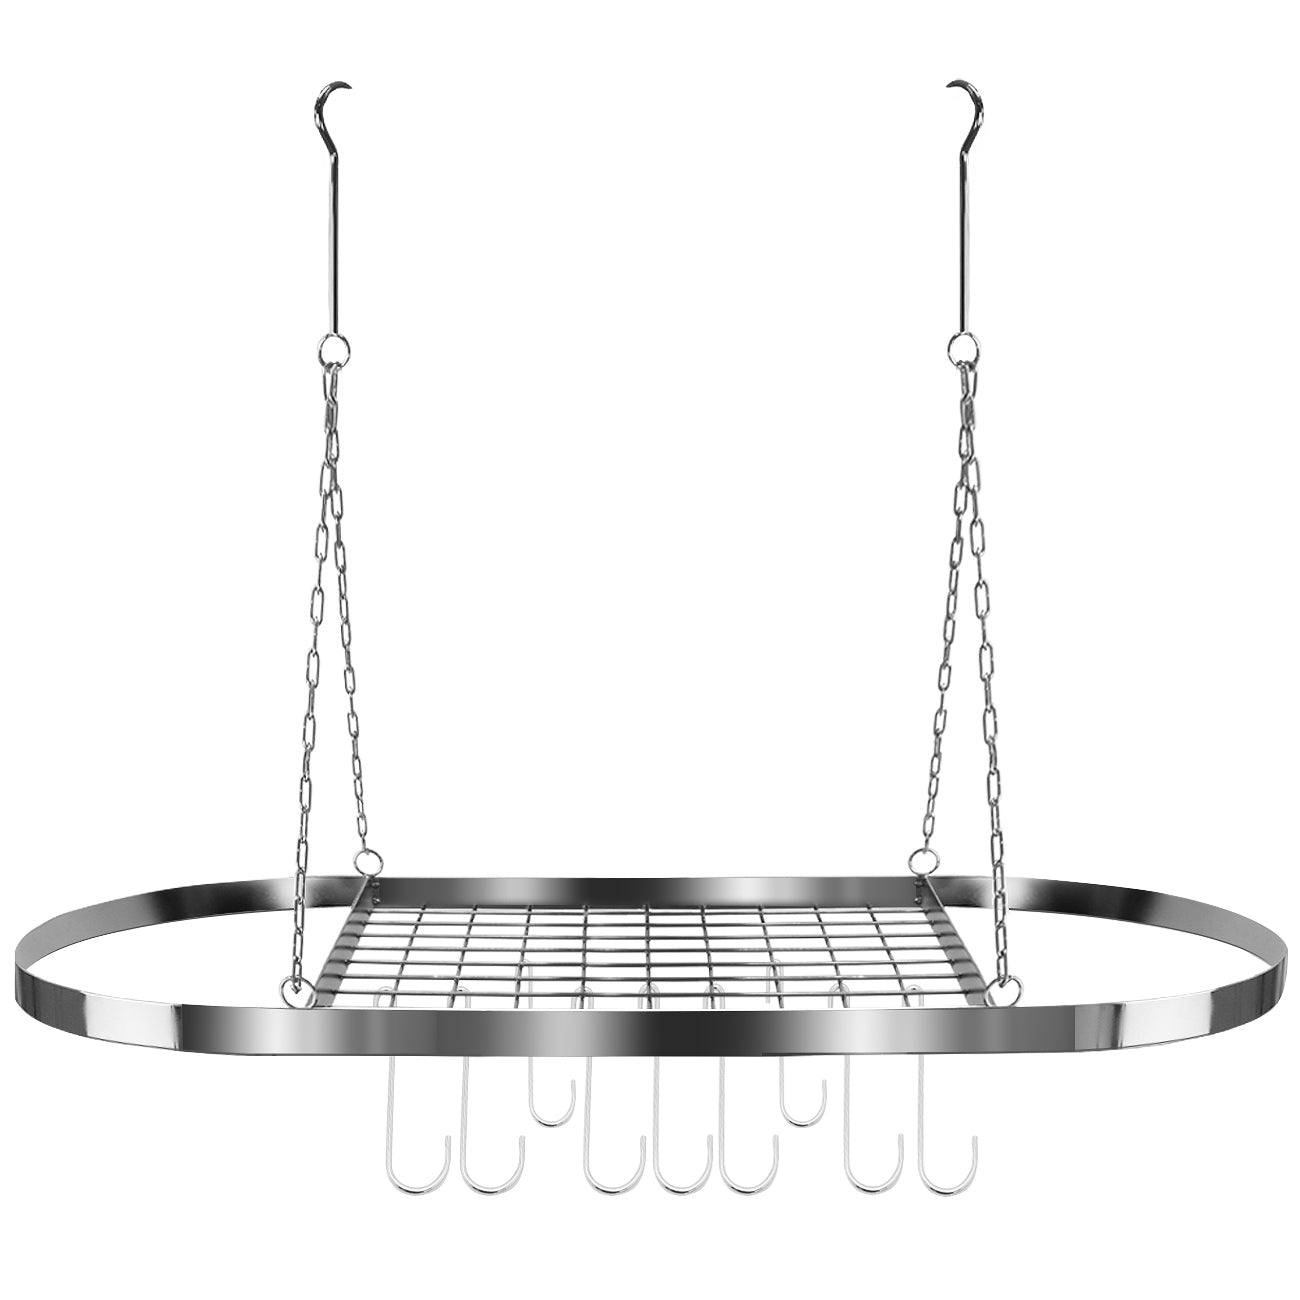 Hanging Pot Racks, Oval Stainless Steel Pot And Pan Rack For